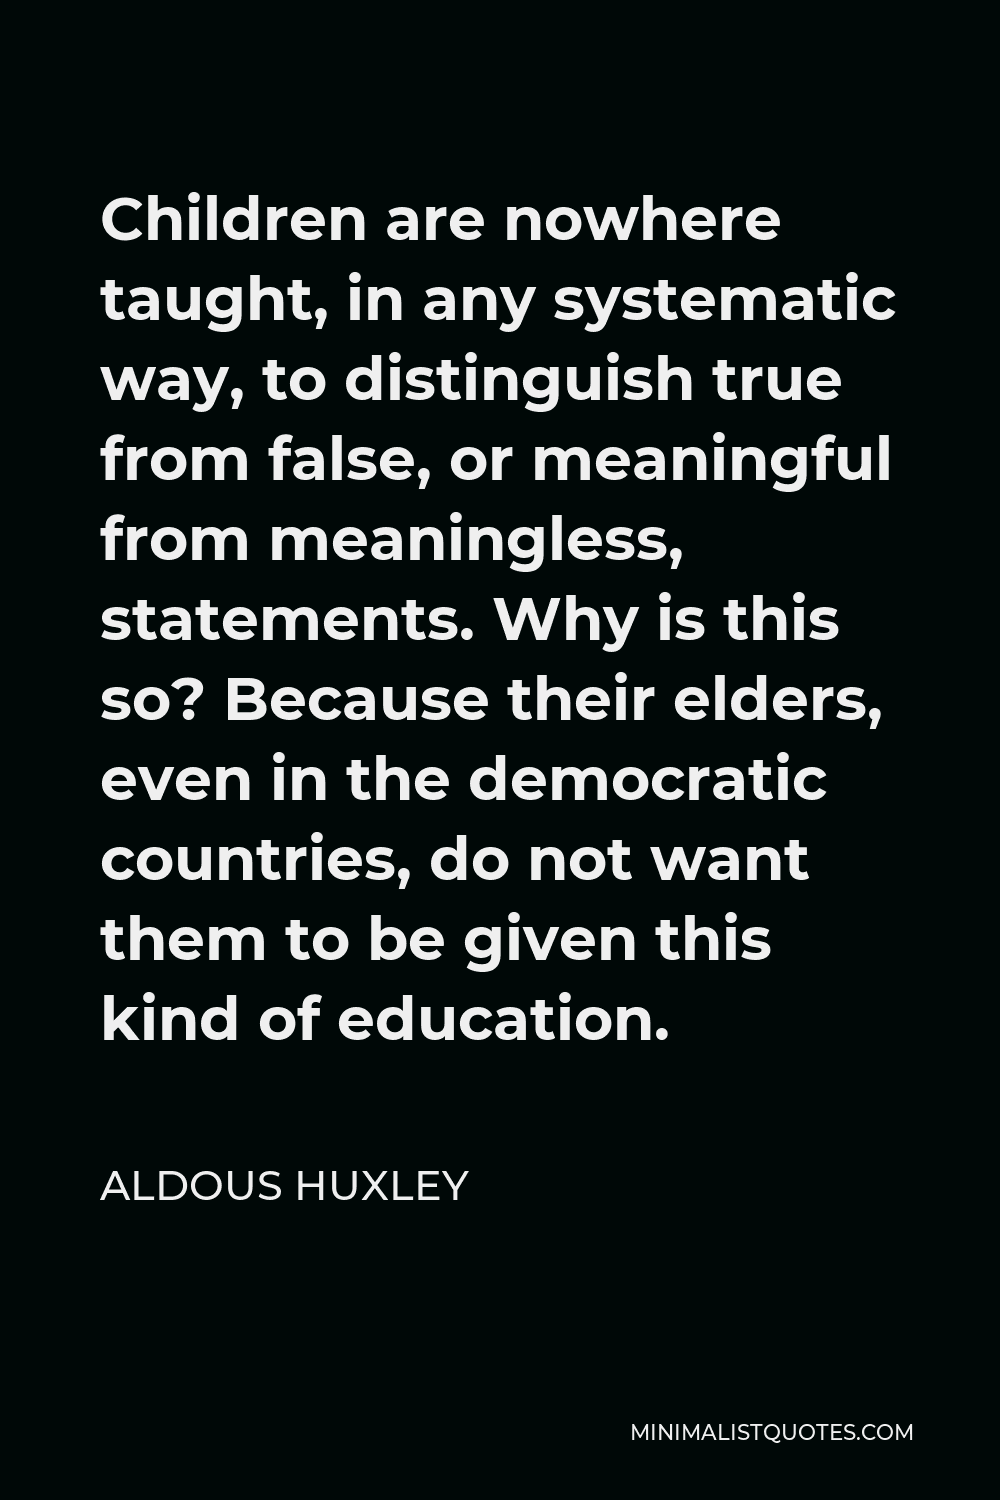 Aldous Huxley Quote - Children are nowhere taught, in any systematic way, to distinguish true from false, or meaningful from meaningless, statements. Why is this so? Because their elders, even in the democratic countries, do not want them to be given this kind of education.